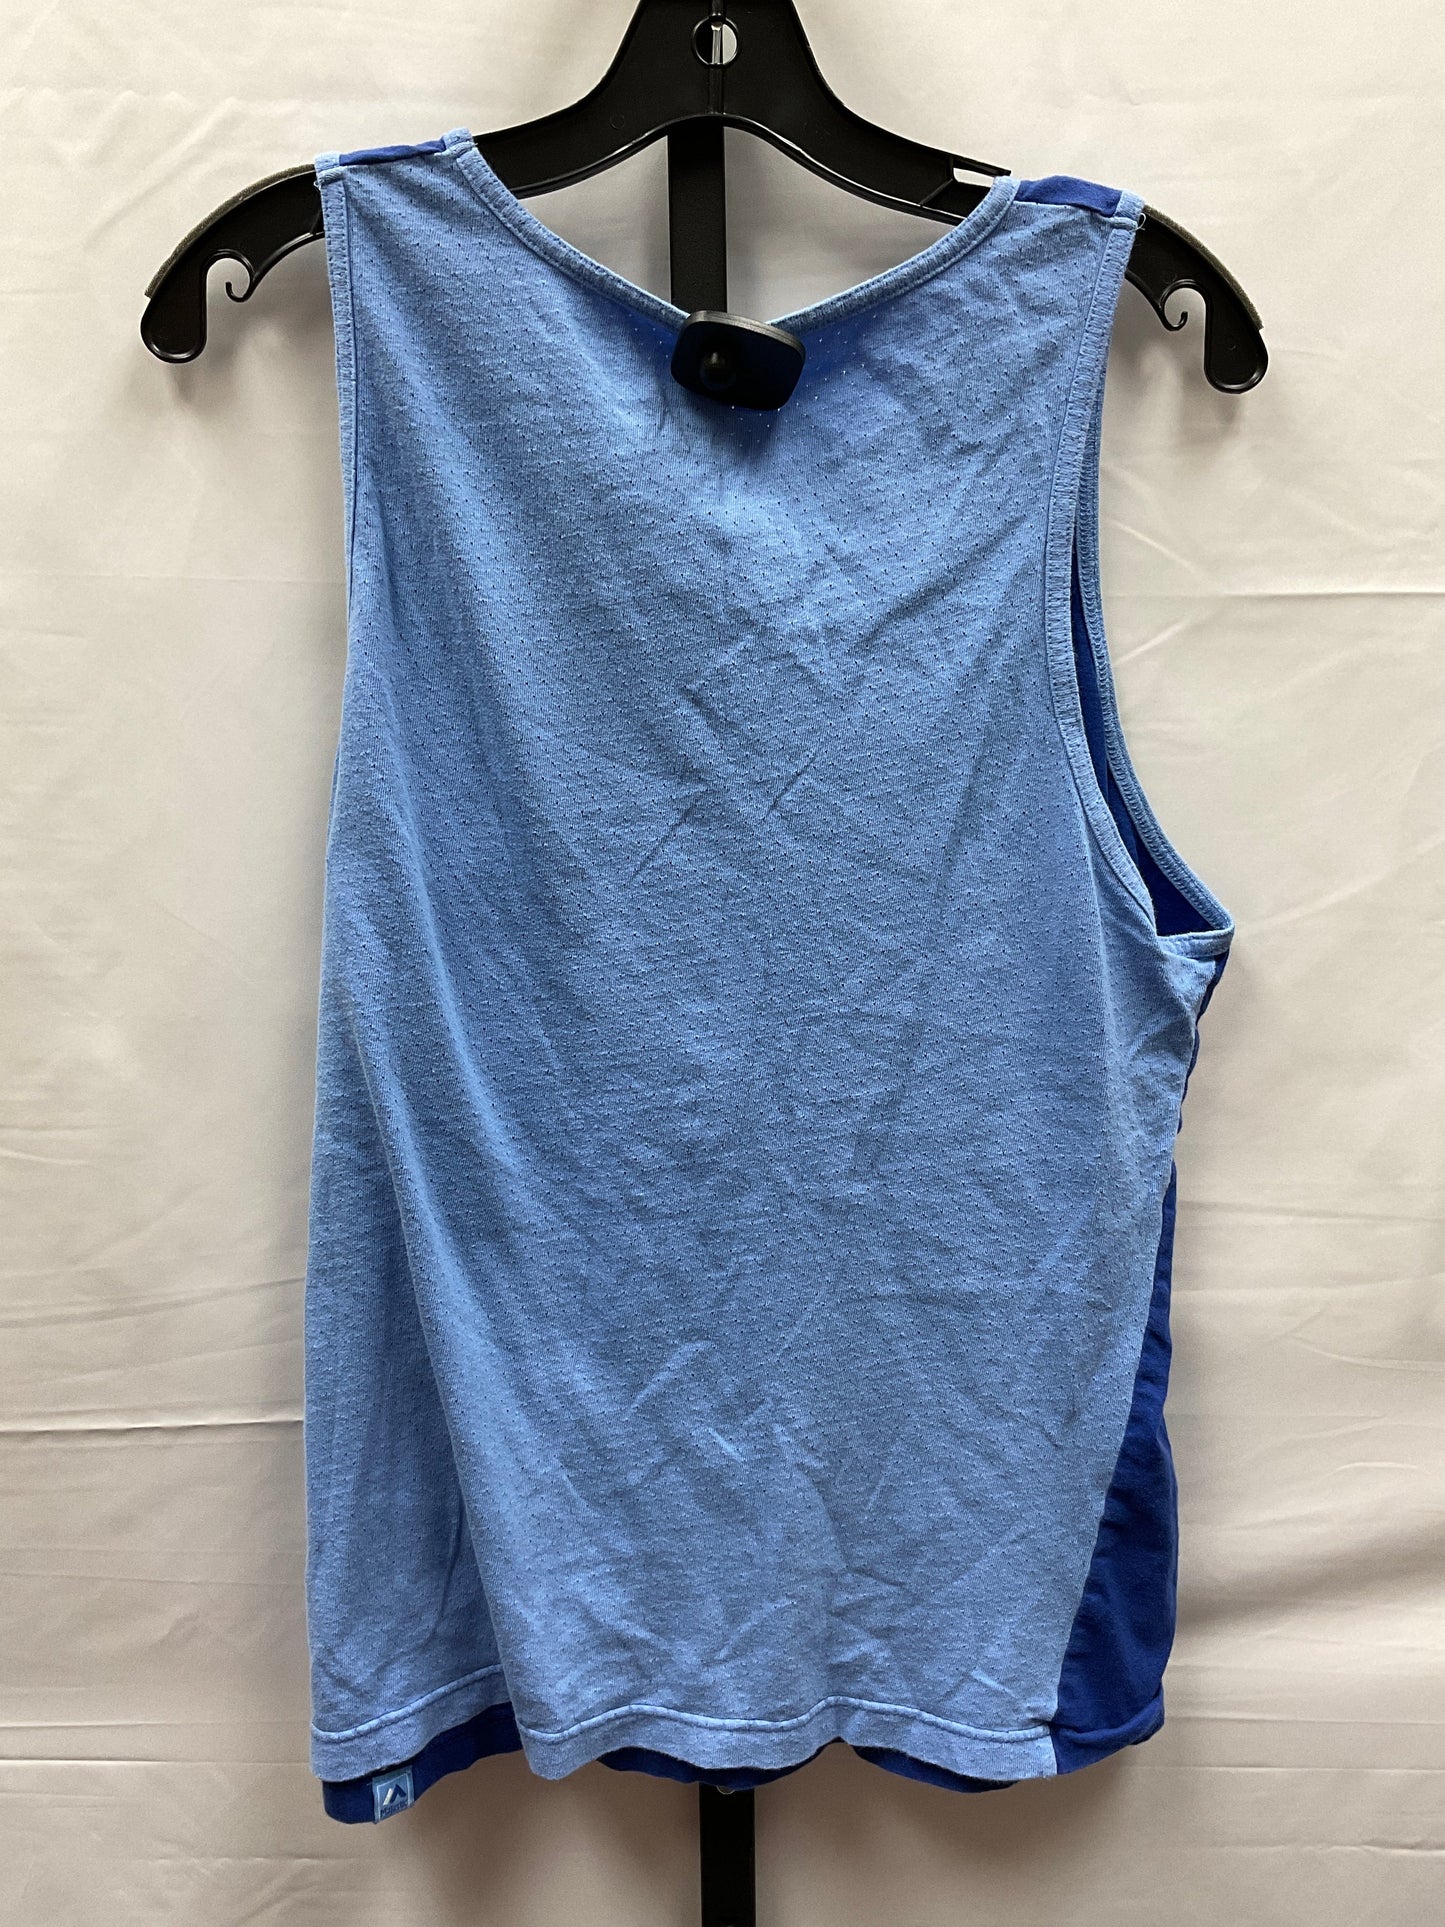 Blue & White Athletic Tank Top Majestic, Size M